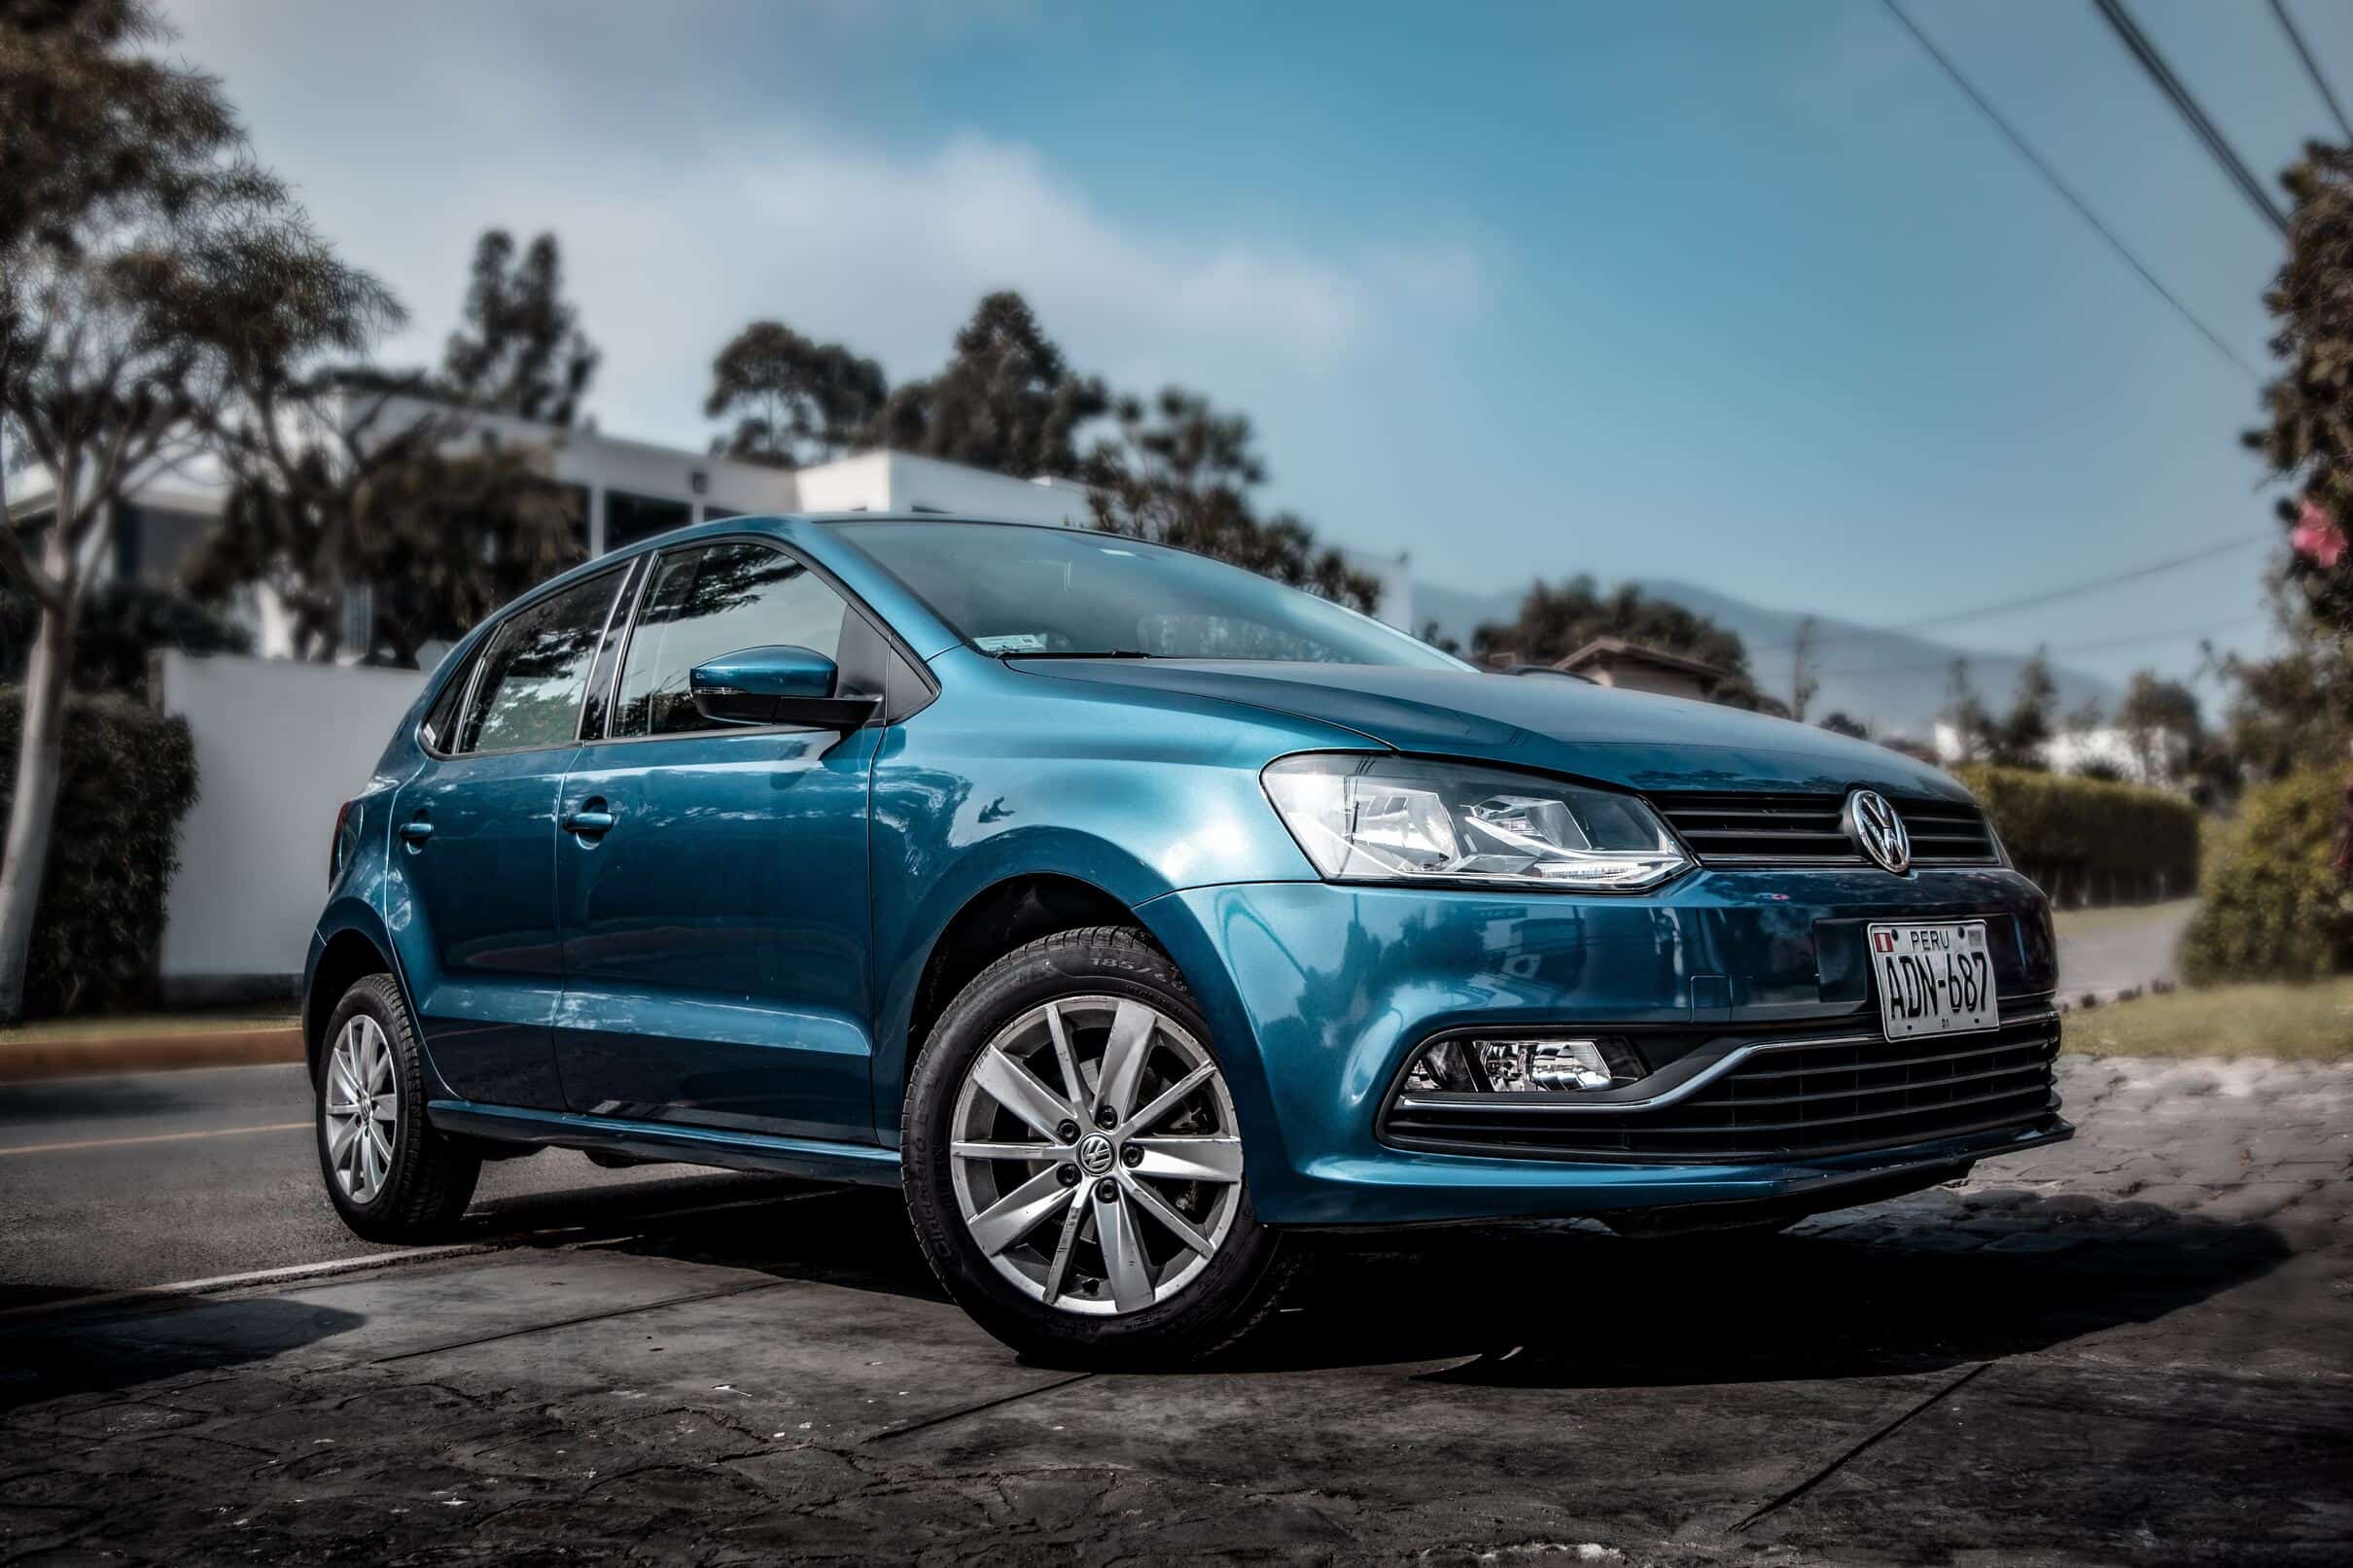 Blue Volkswagen Polo - A Stylish Subcompact Car